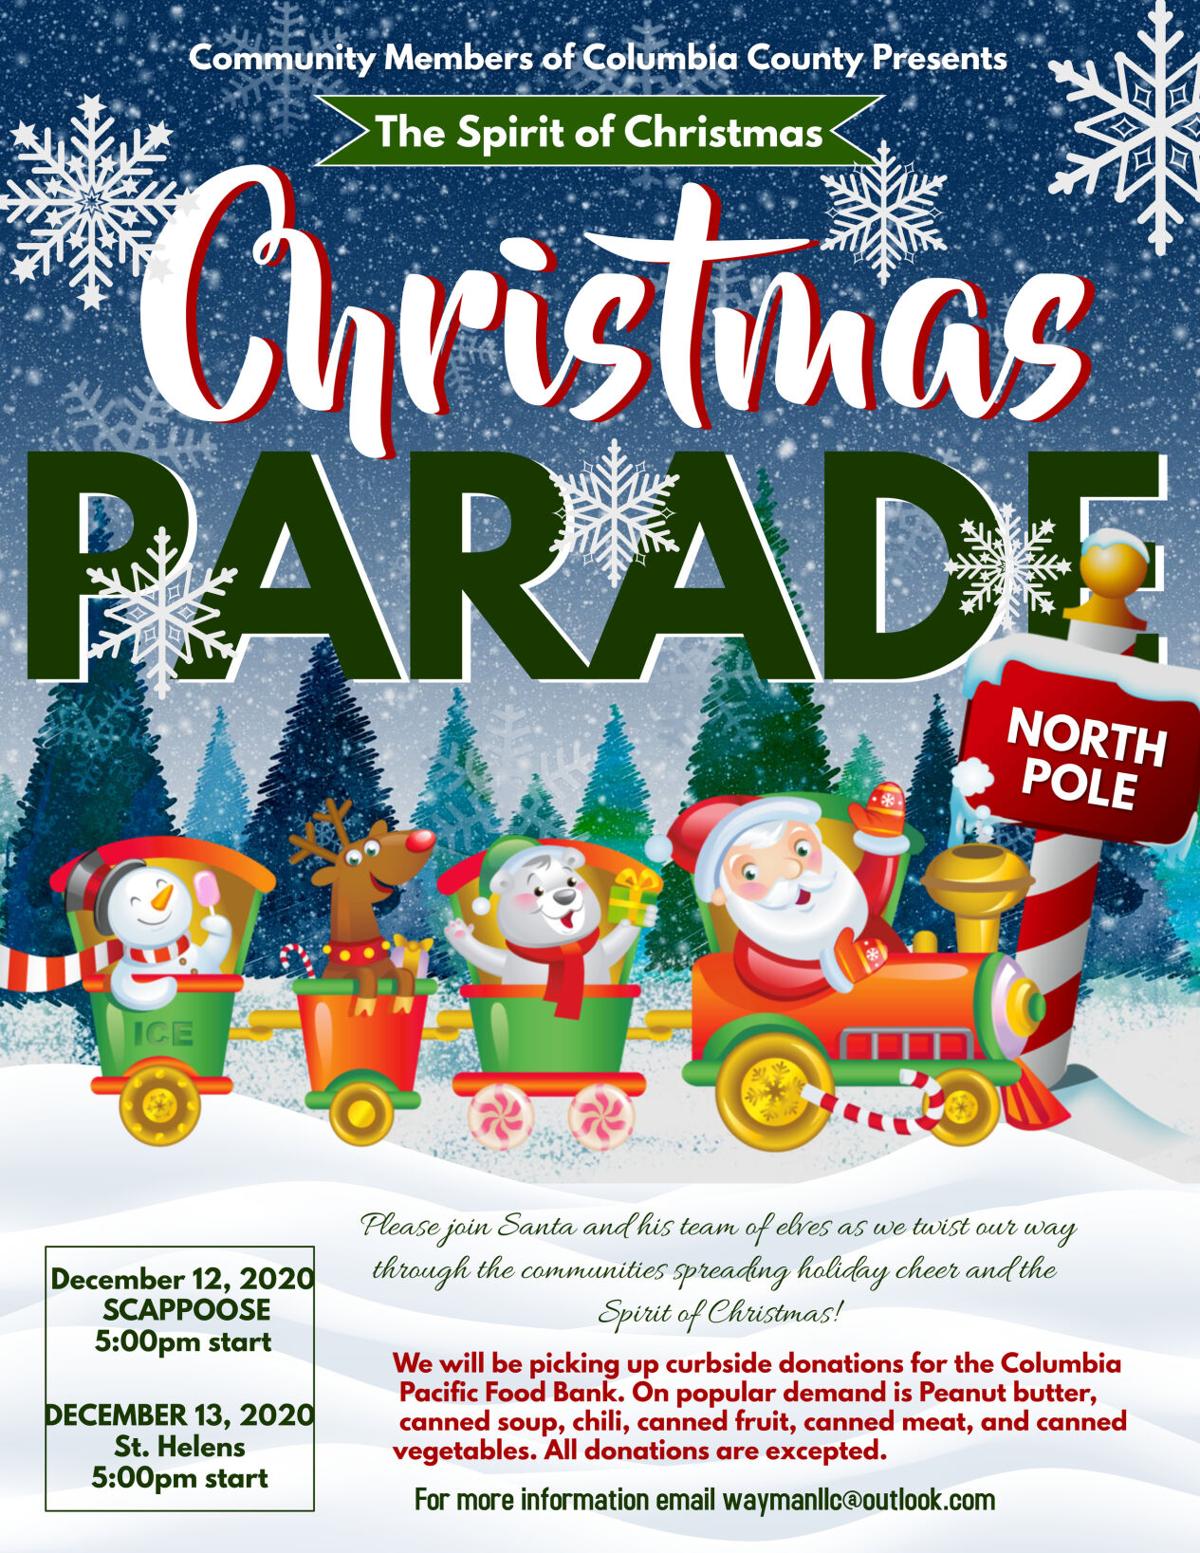 Christmas Local parades planned to spread holiday spirit, boost hope